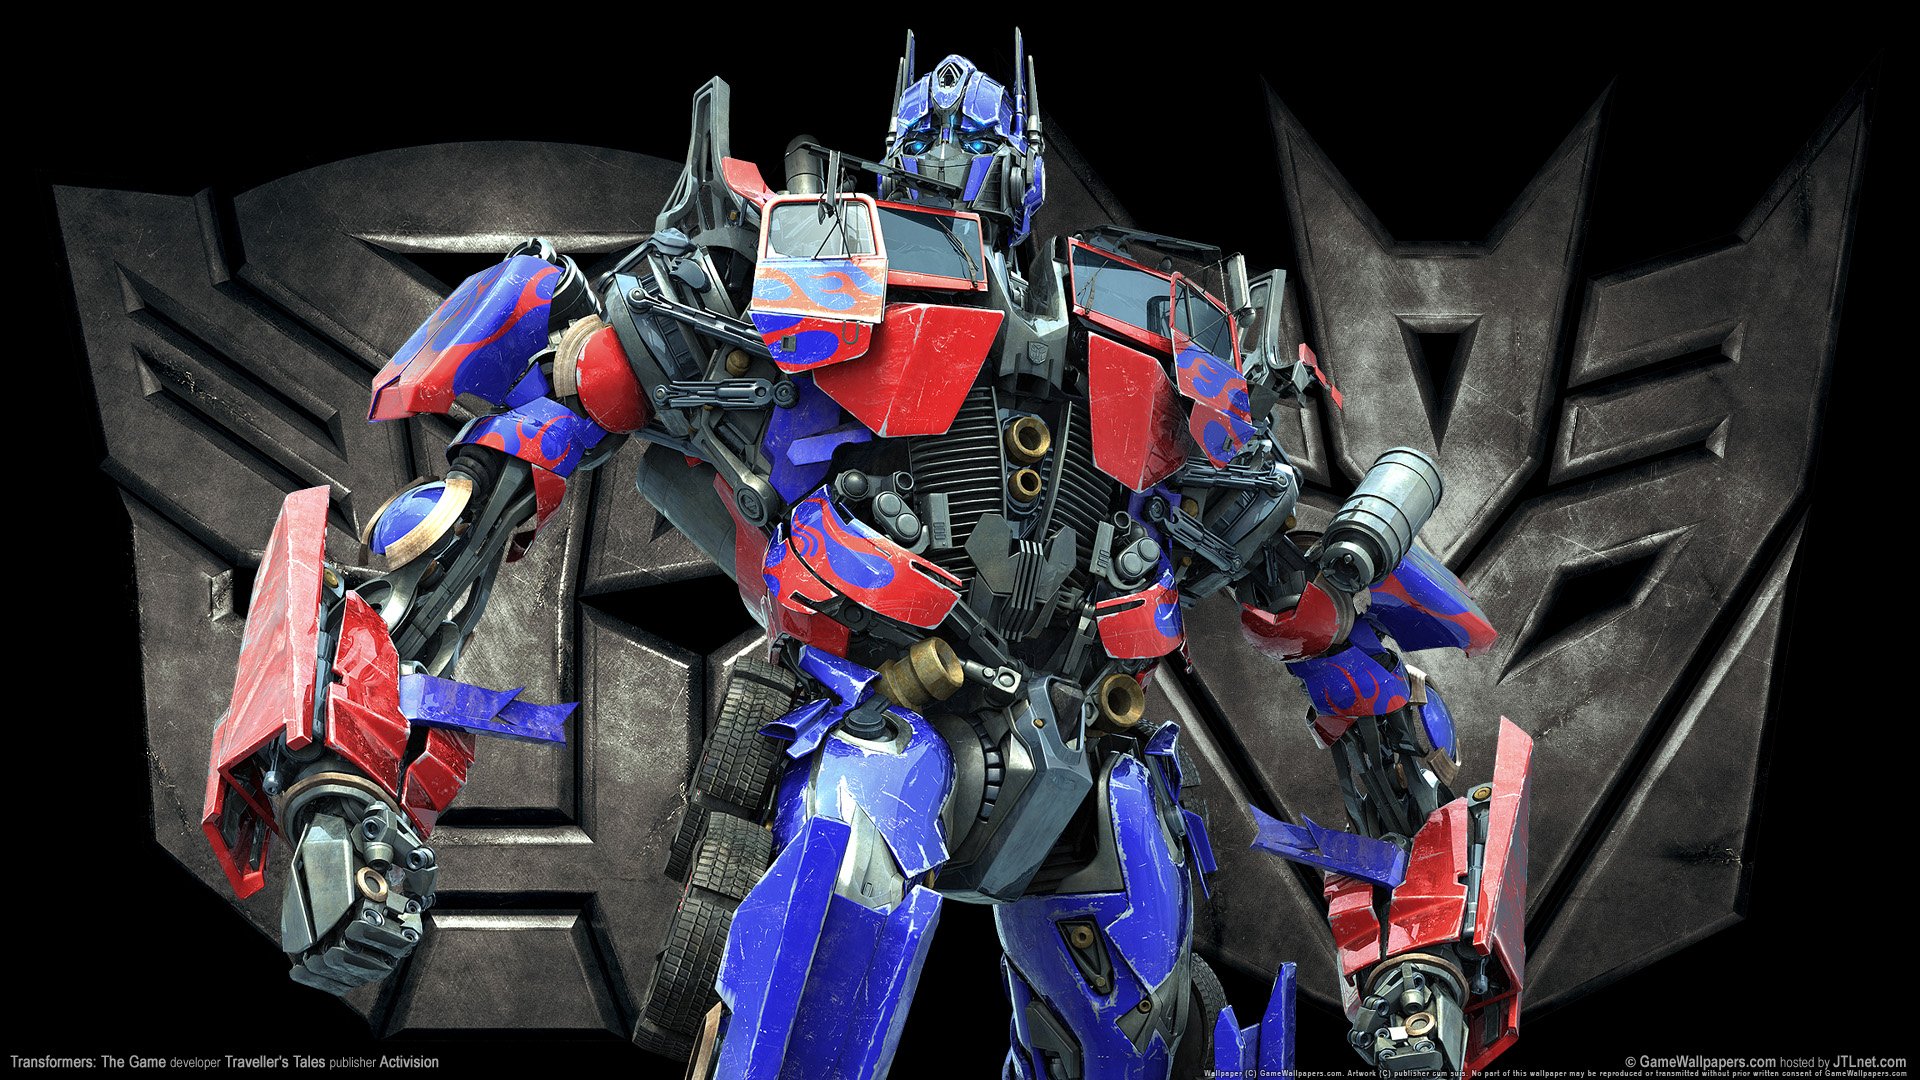 Get the perfect Transformers background game for your project